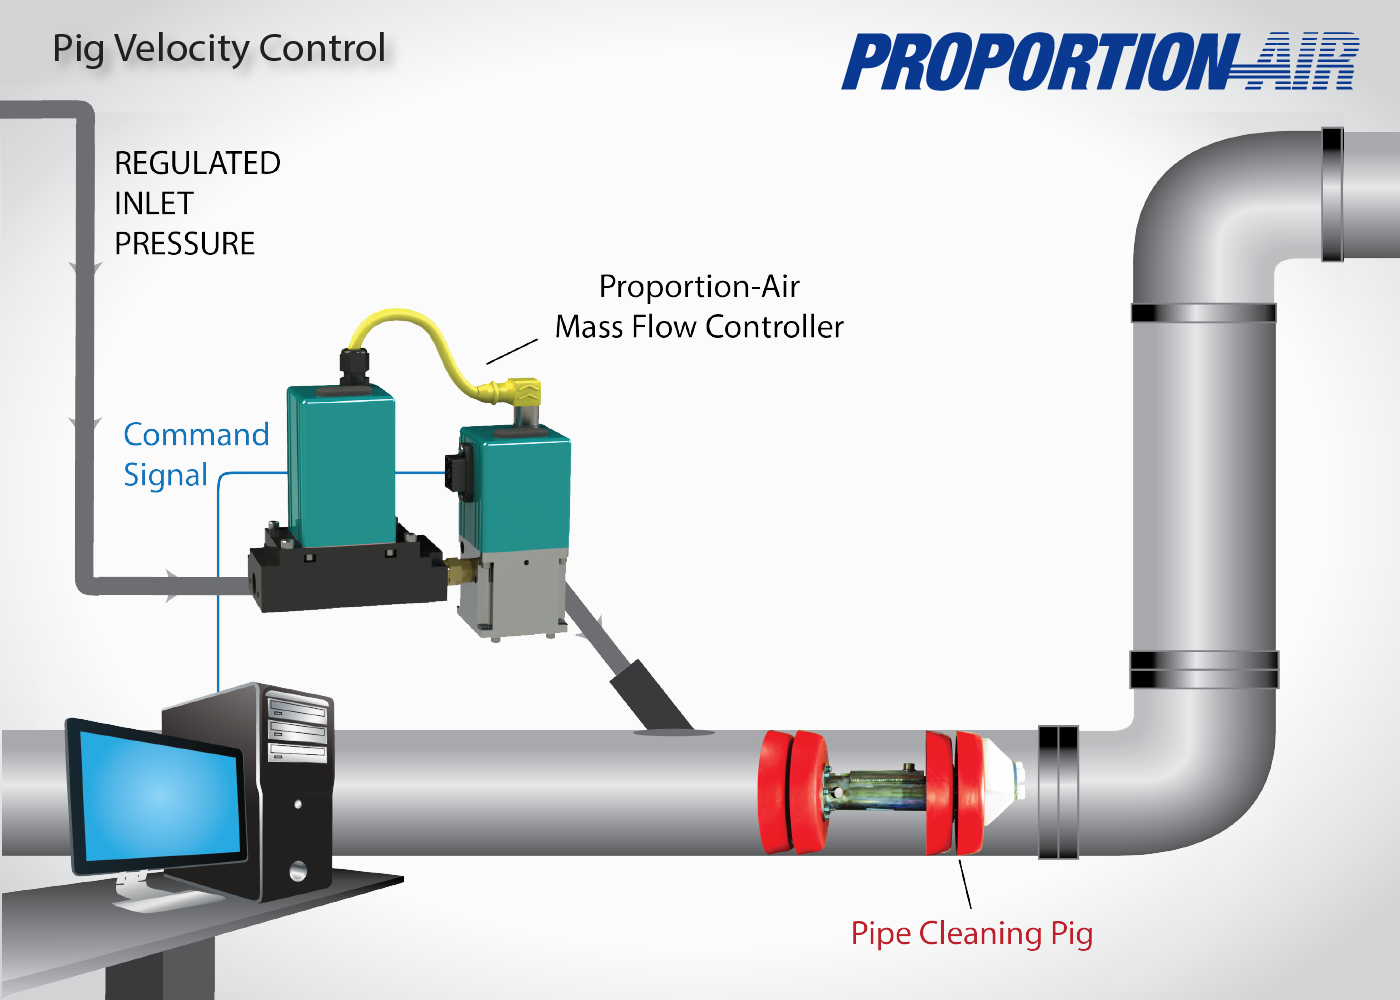 Active Speed Control Pig - For High Velocity Pipelines